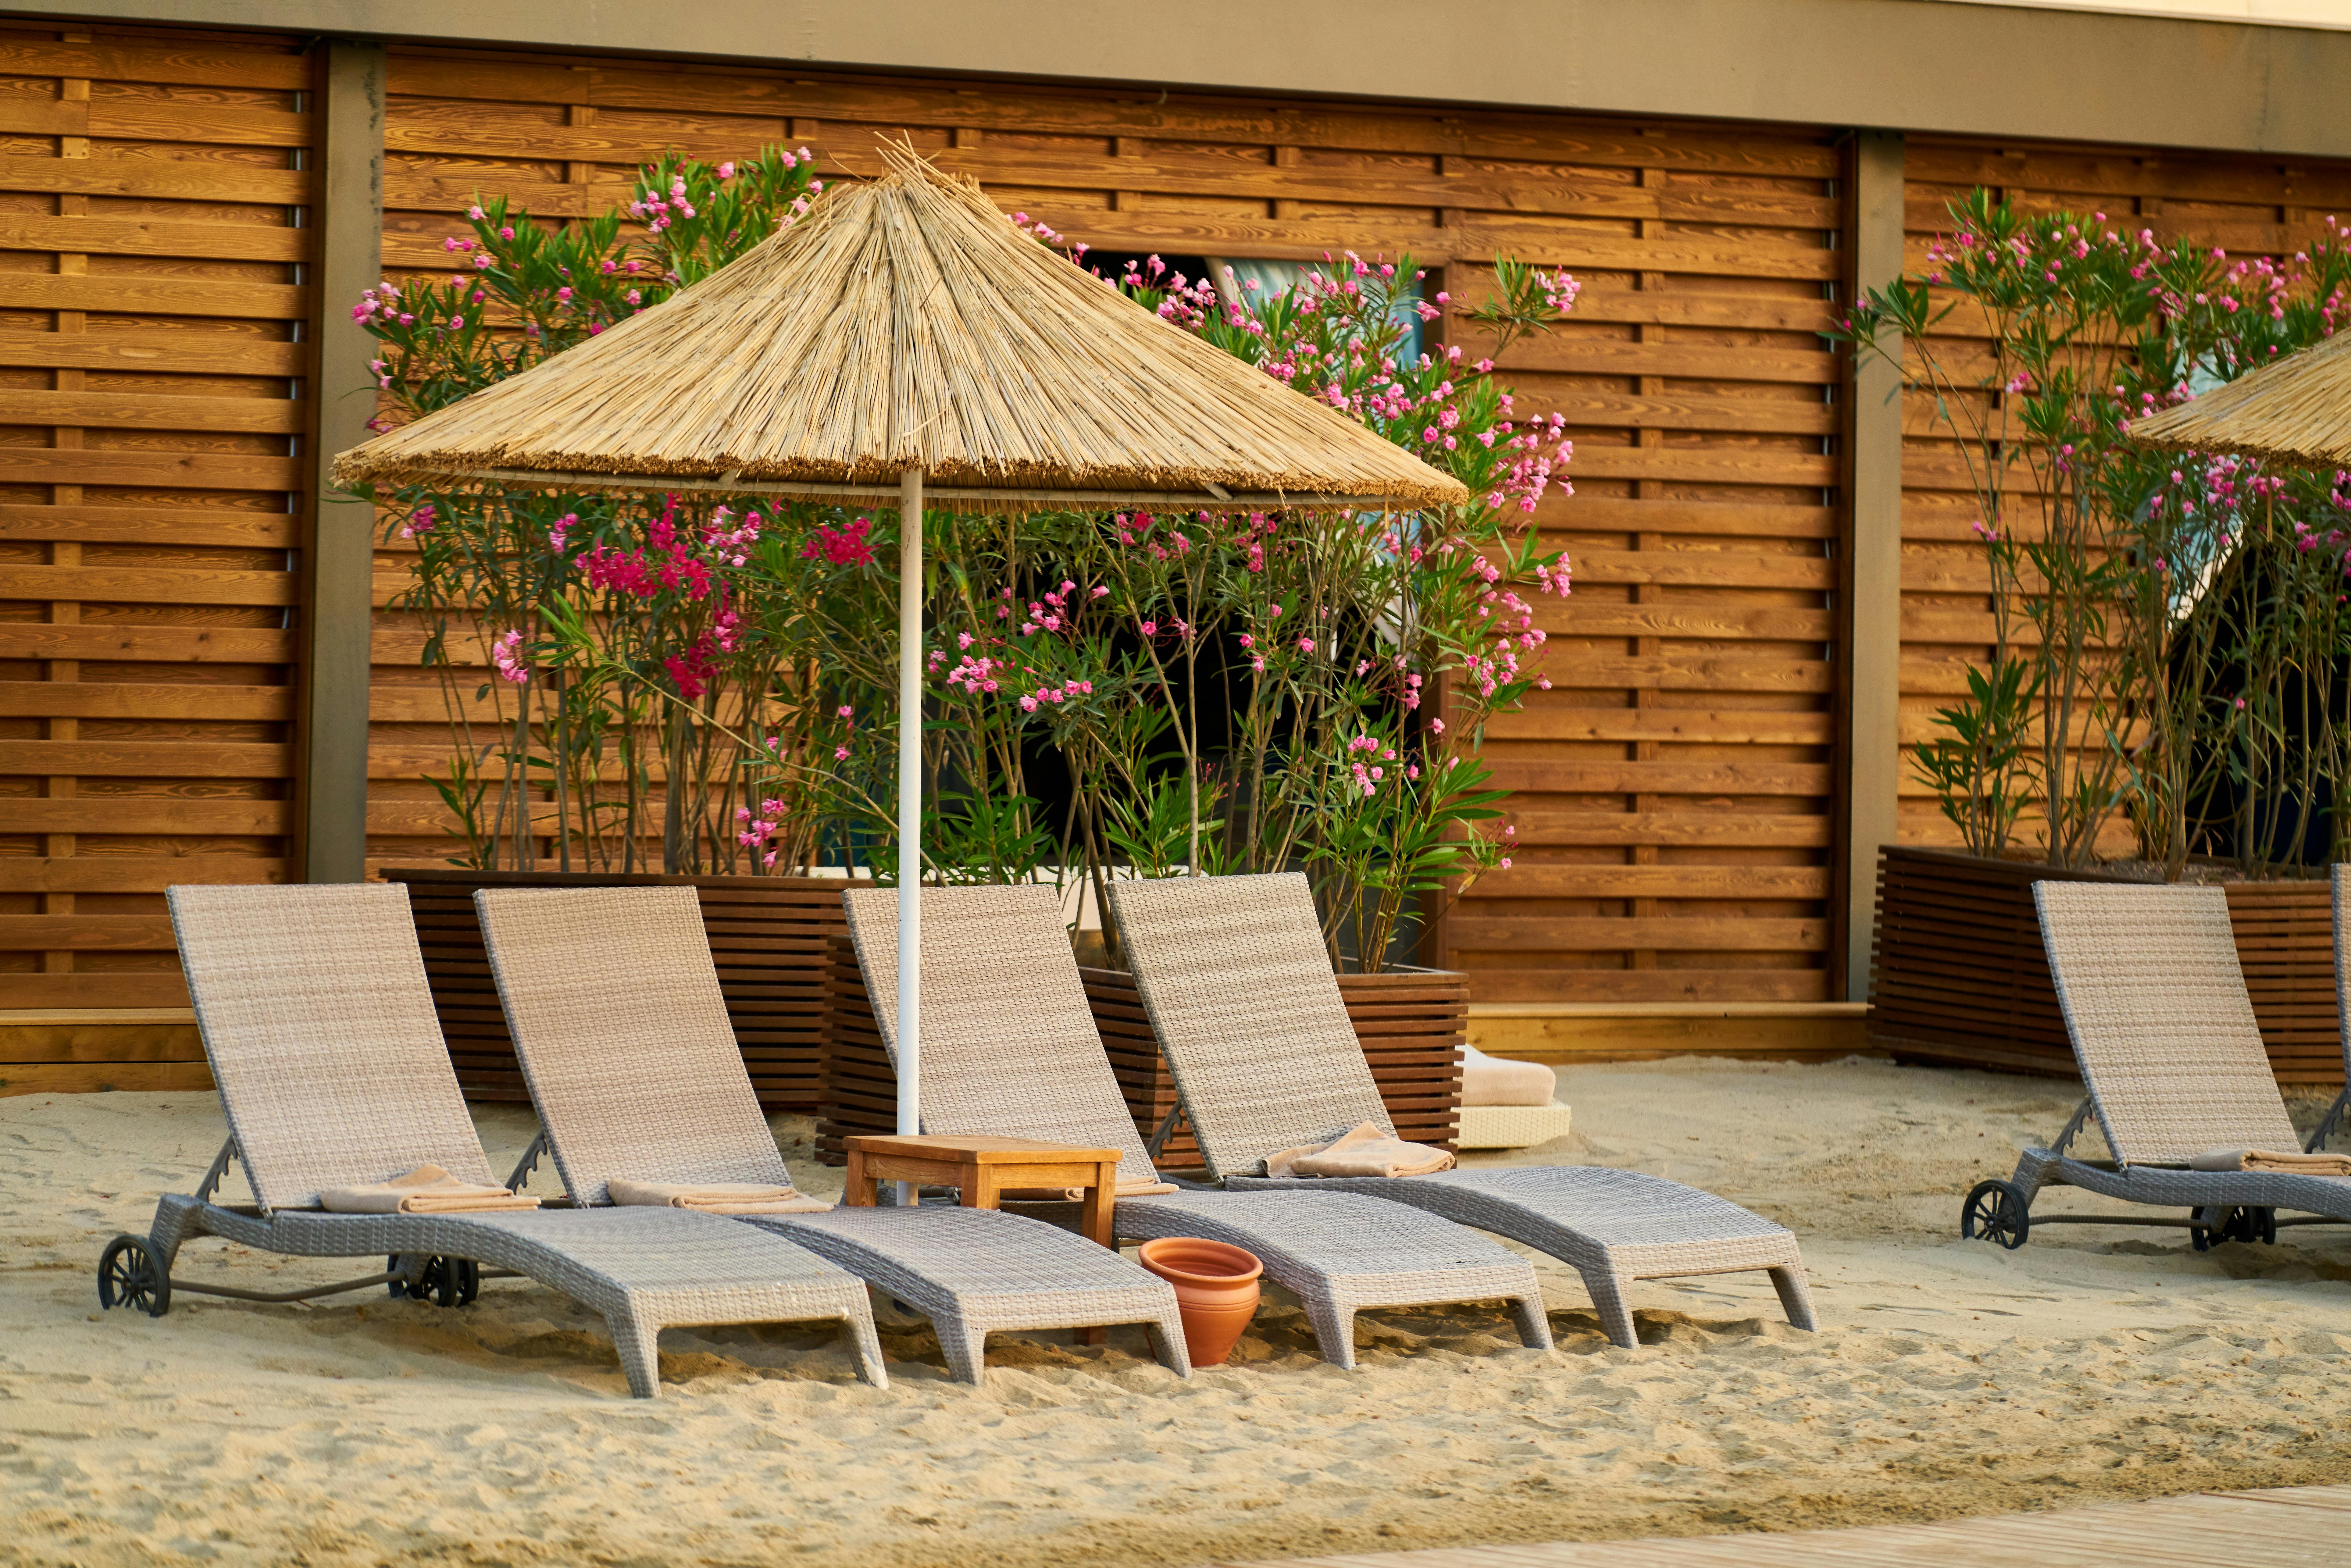 Wicker Outdoor Lounge Chairs On Sand · Free Stock Photo